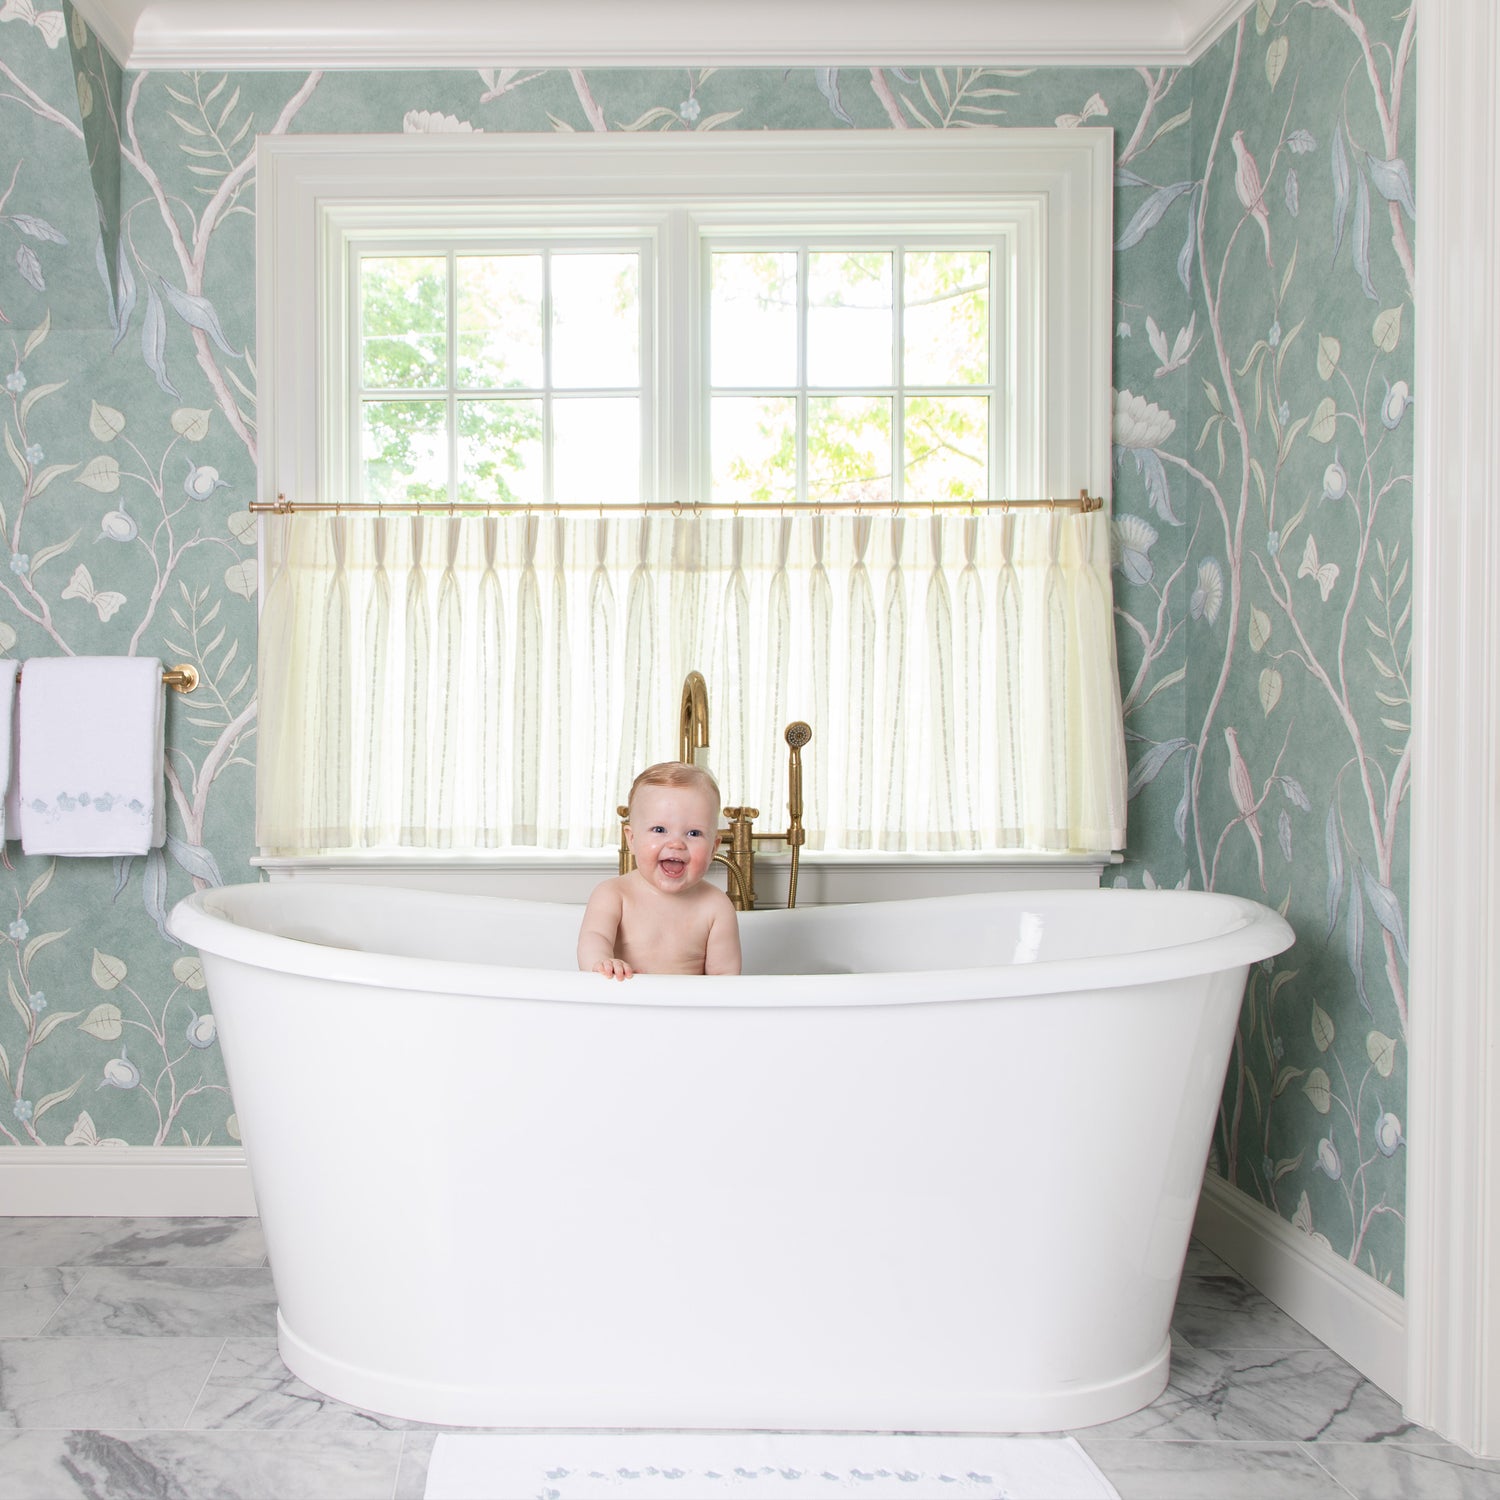 sheer white cafe curtain with embroidered white stripes hung in an illuminated window in a bathroom with a white bath tub in front of the window with botanical wallpaper on the walls 